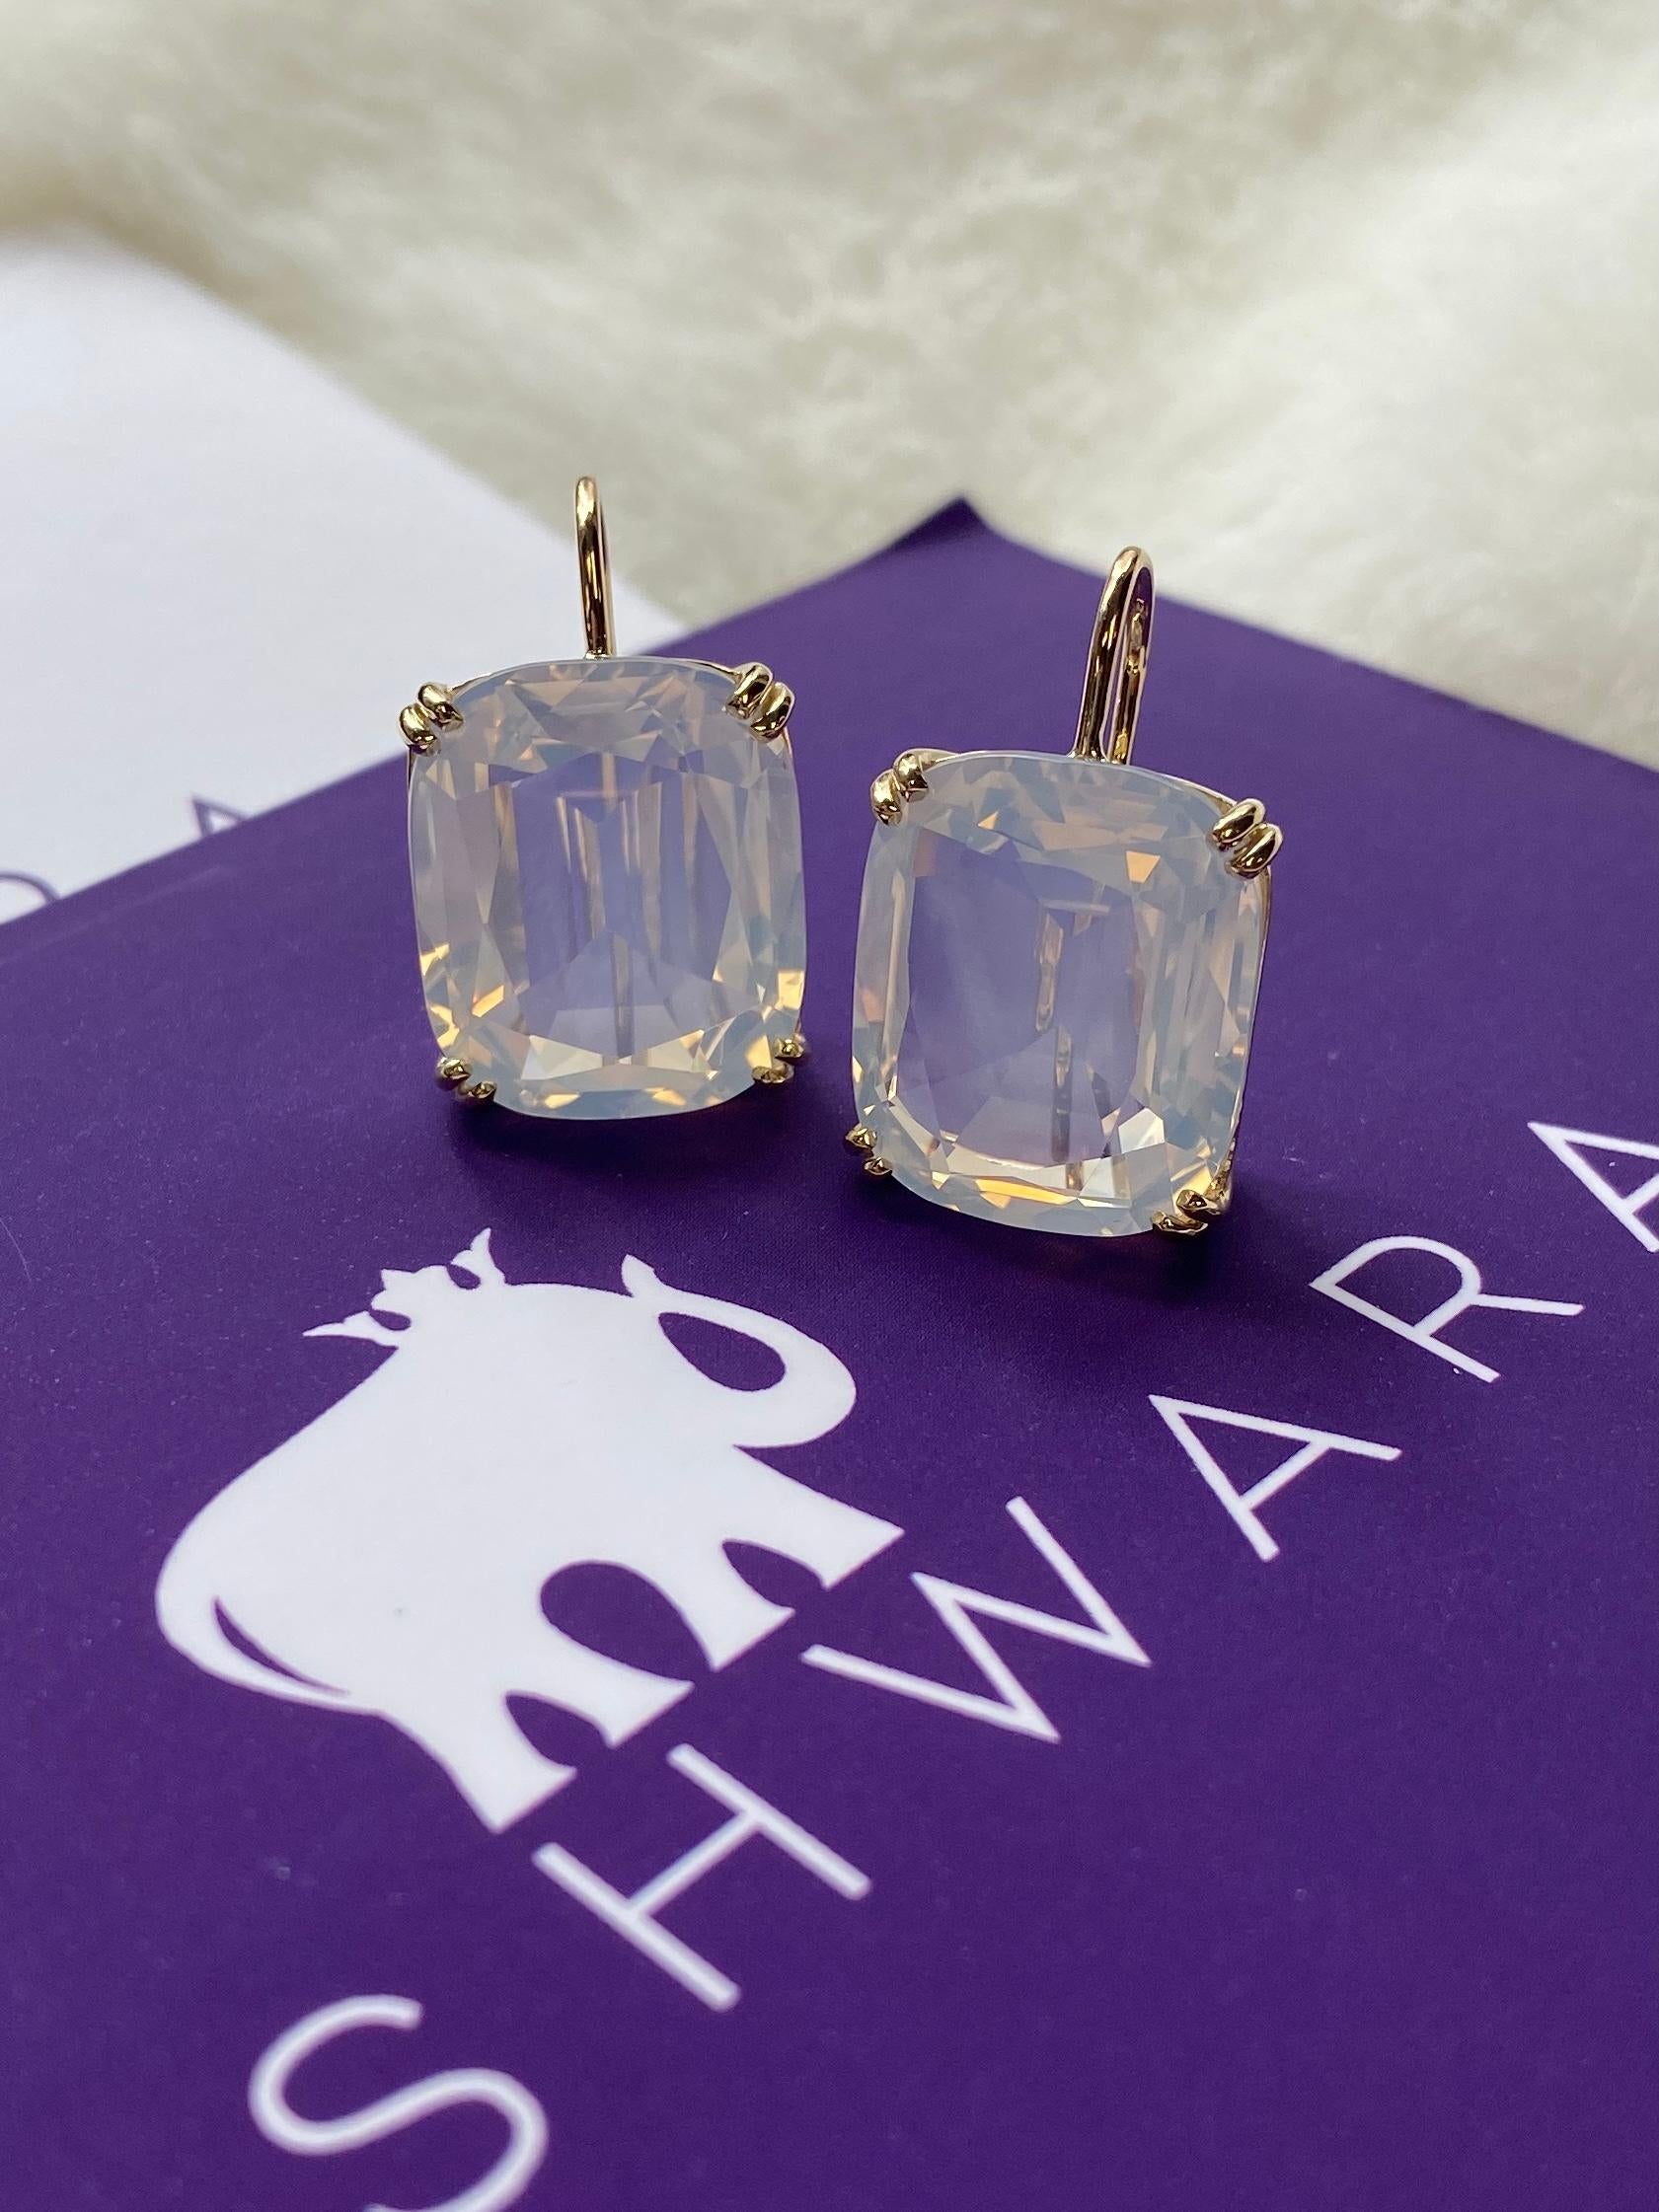 These beautiful Moon Quartz Cushion Earrings on Wire are from our 'Gossip' Collection. Like any good piece of 'Gossip', it carries a hint of shock value. If you want to make a statement, these are the perfect earrings to do it.

* Gemstone: 100%